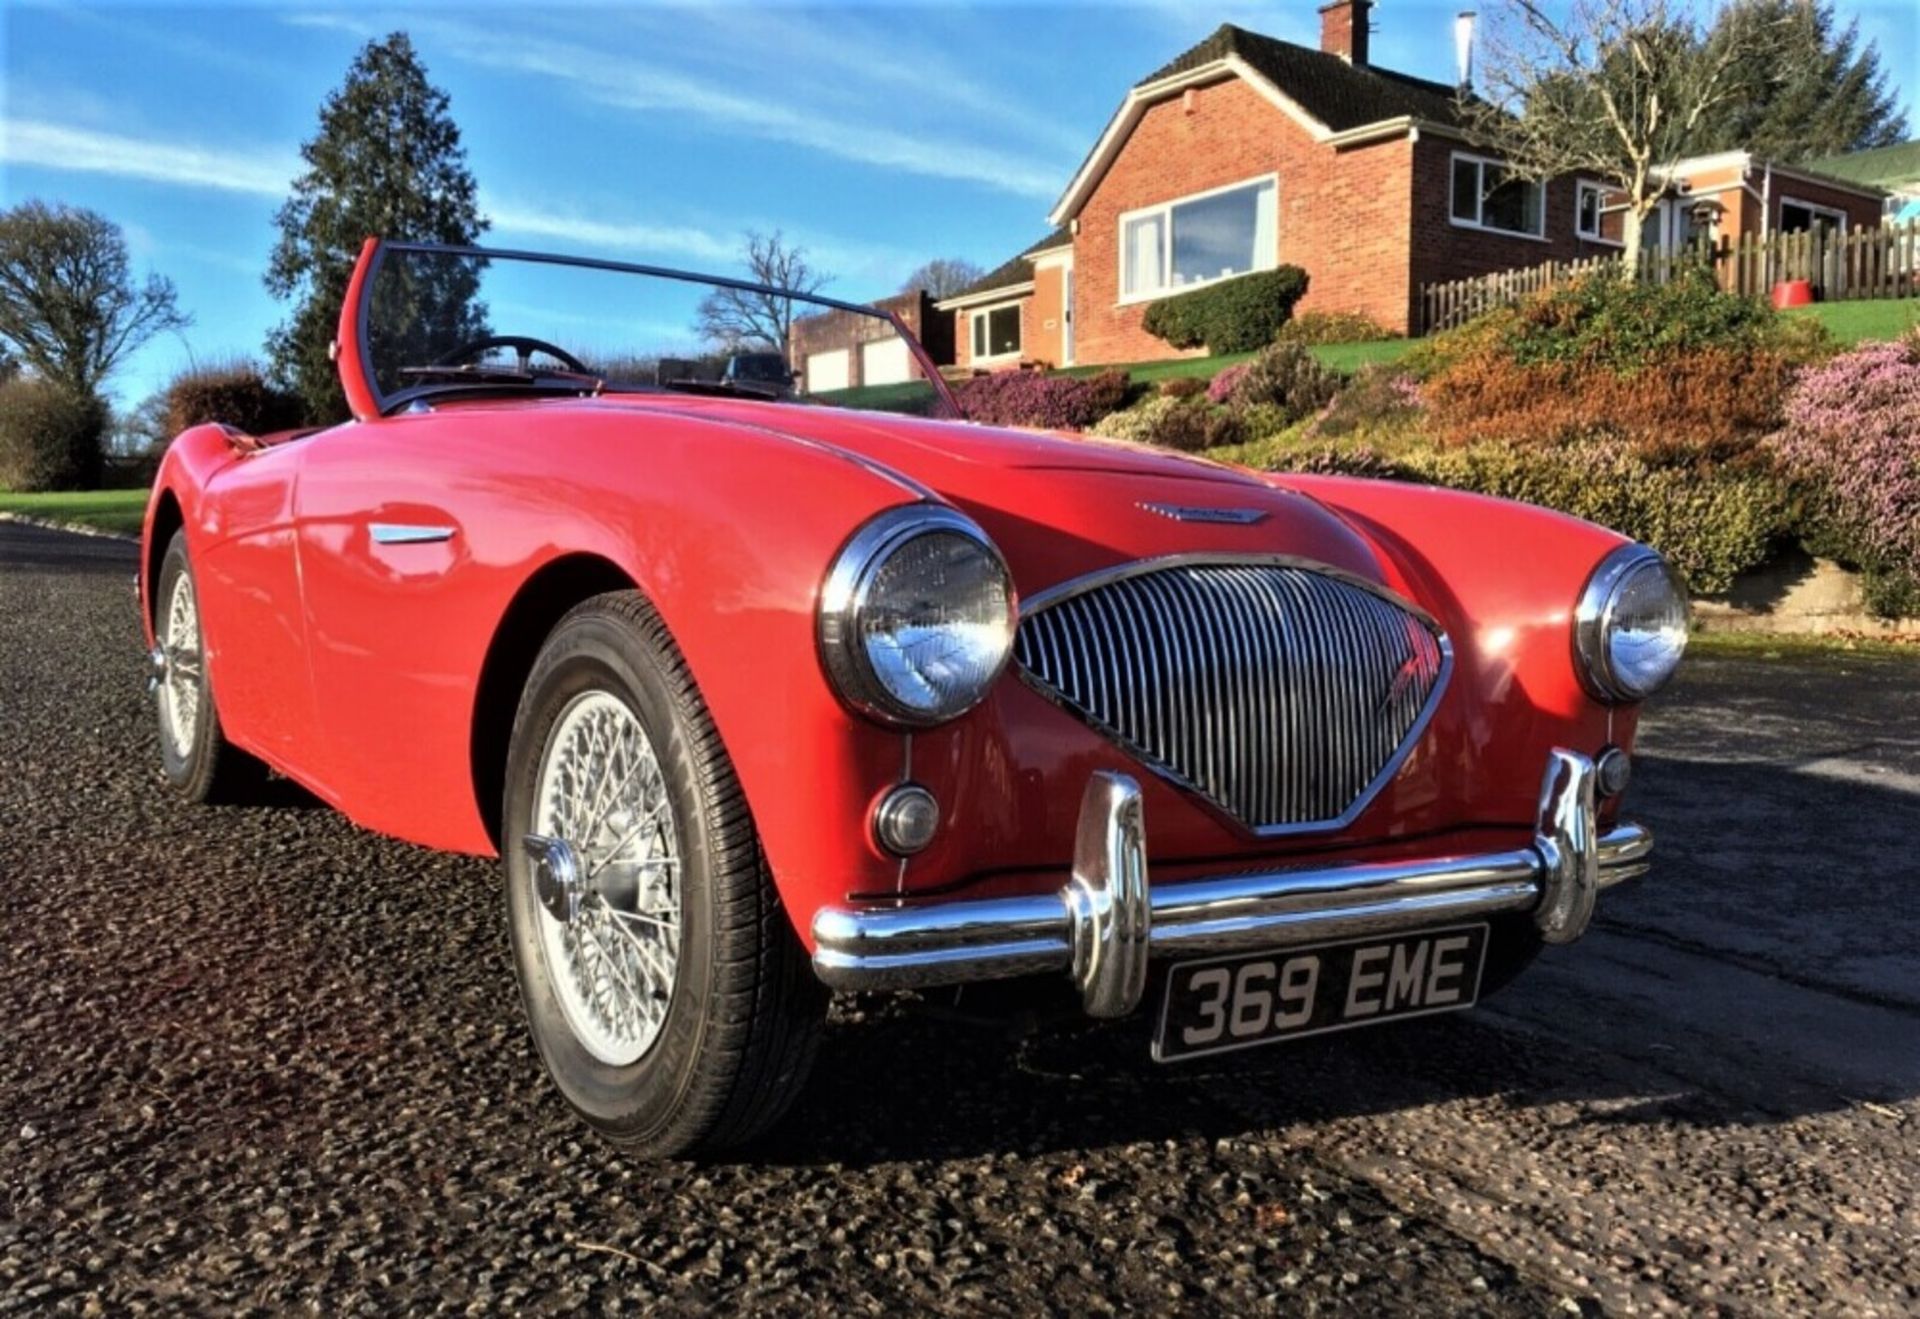 1955 AUSTIN-HEALEY 100/4 Registration Number: 369 EME  Chassis Number: BN1/223234 Recorded - Image 6 of 10